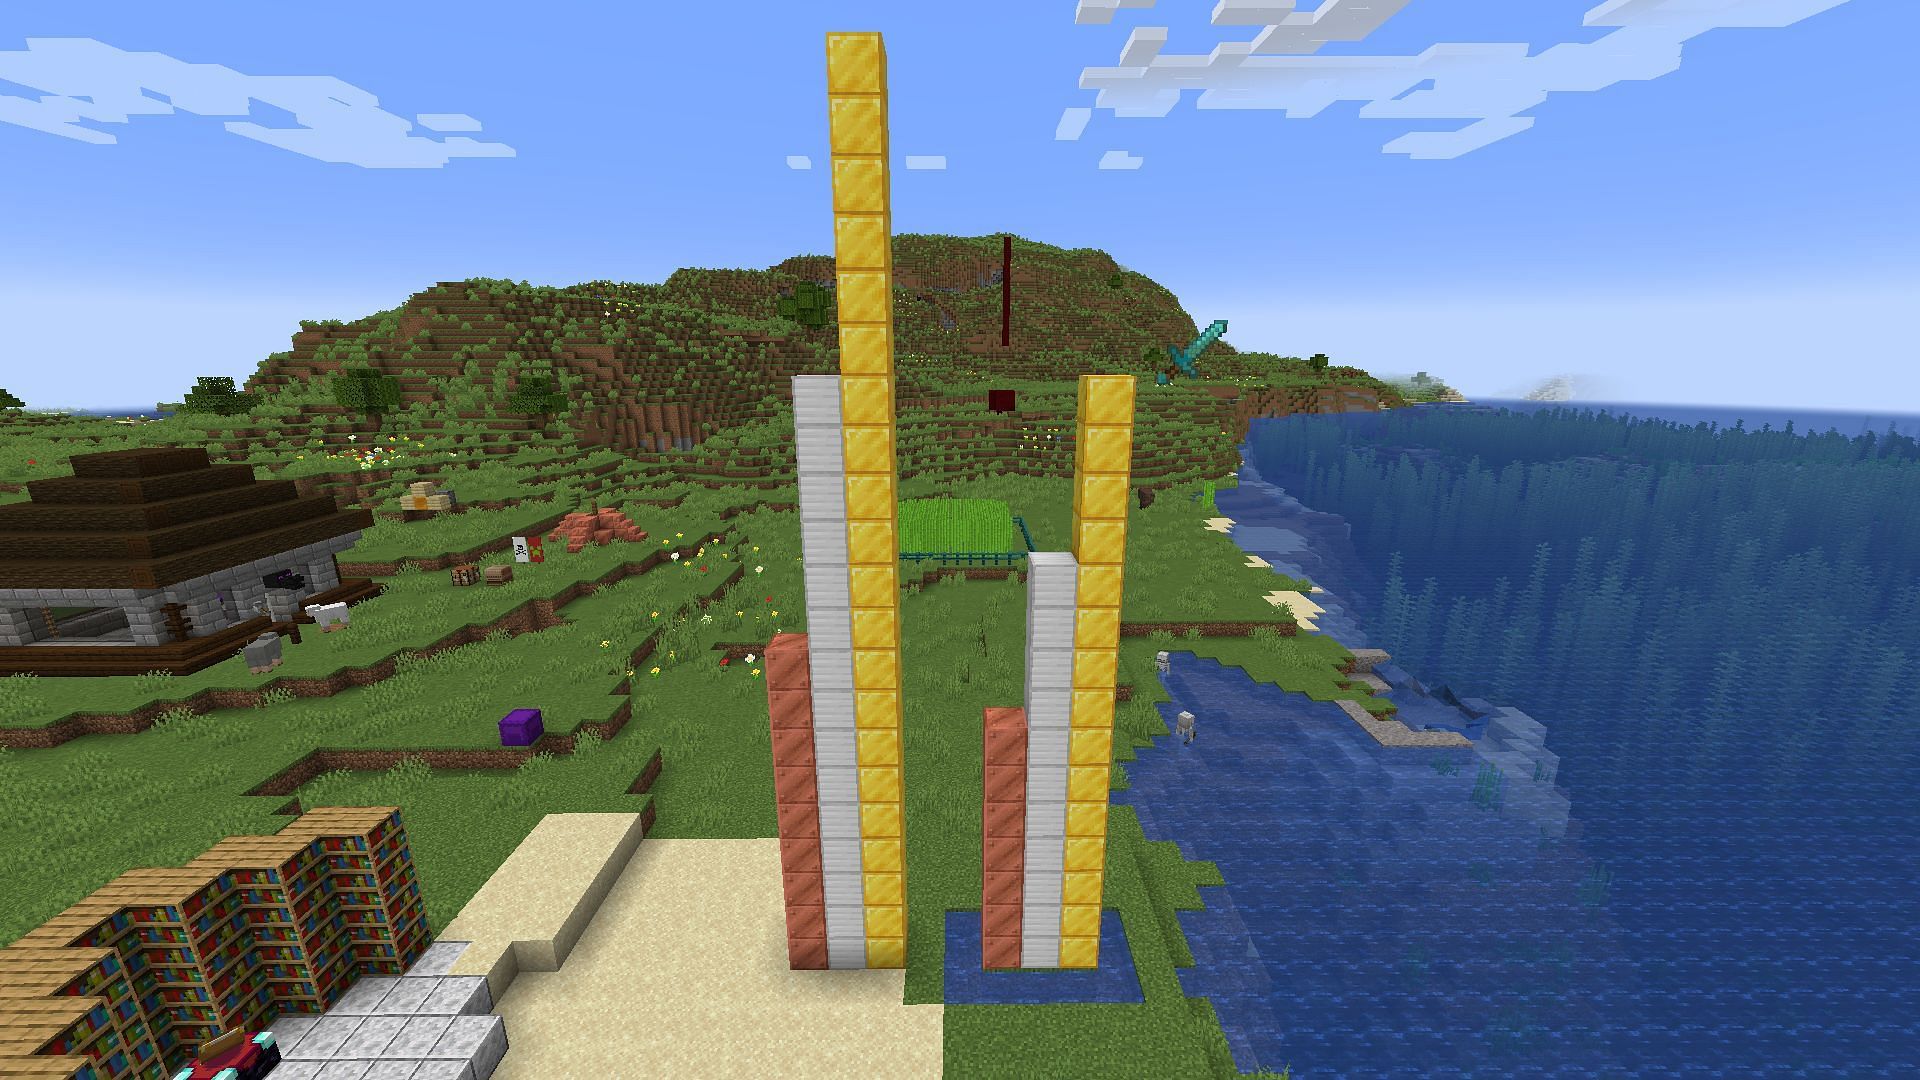 The levels of flying in blocks on the left, vs the levels of water travel in blocks on the right (Image via Minecraft)